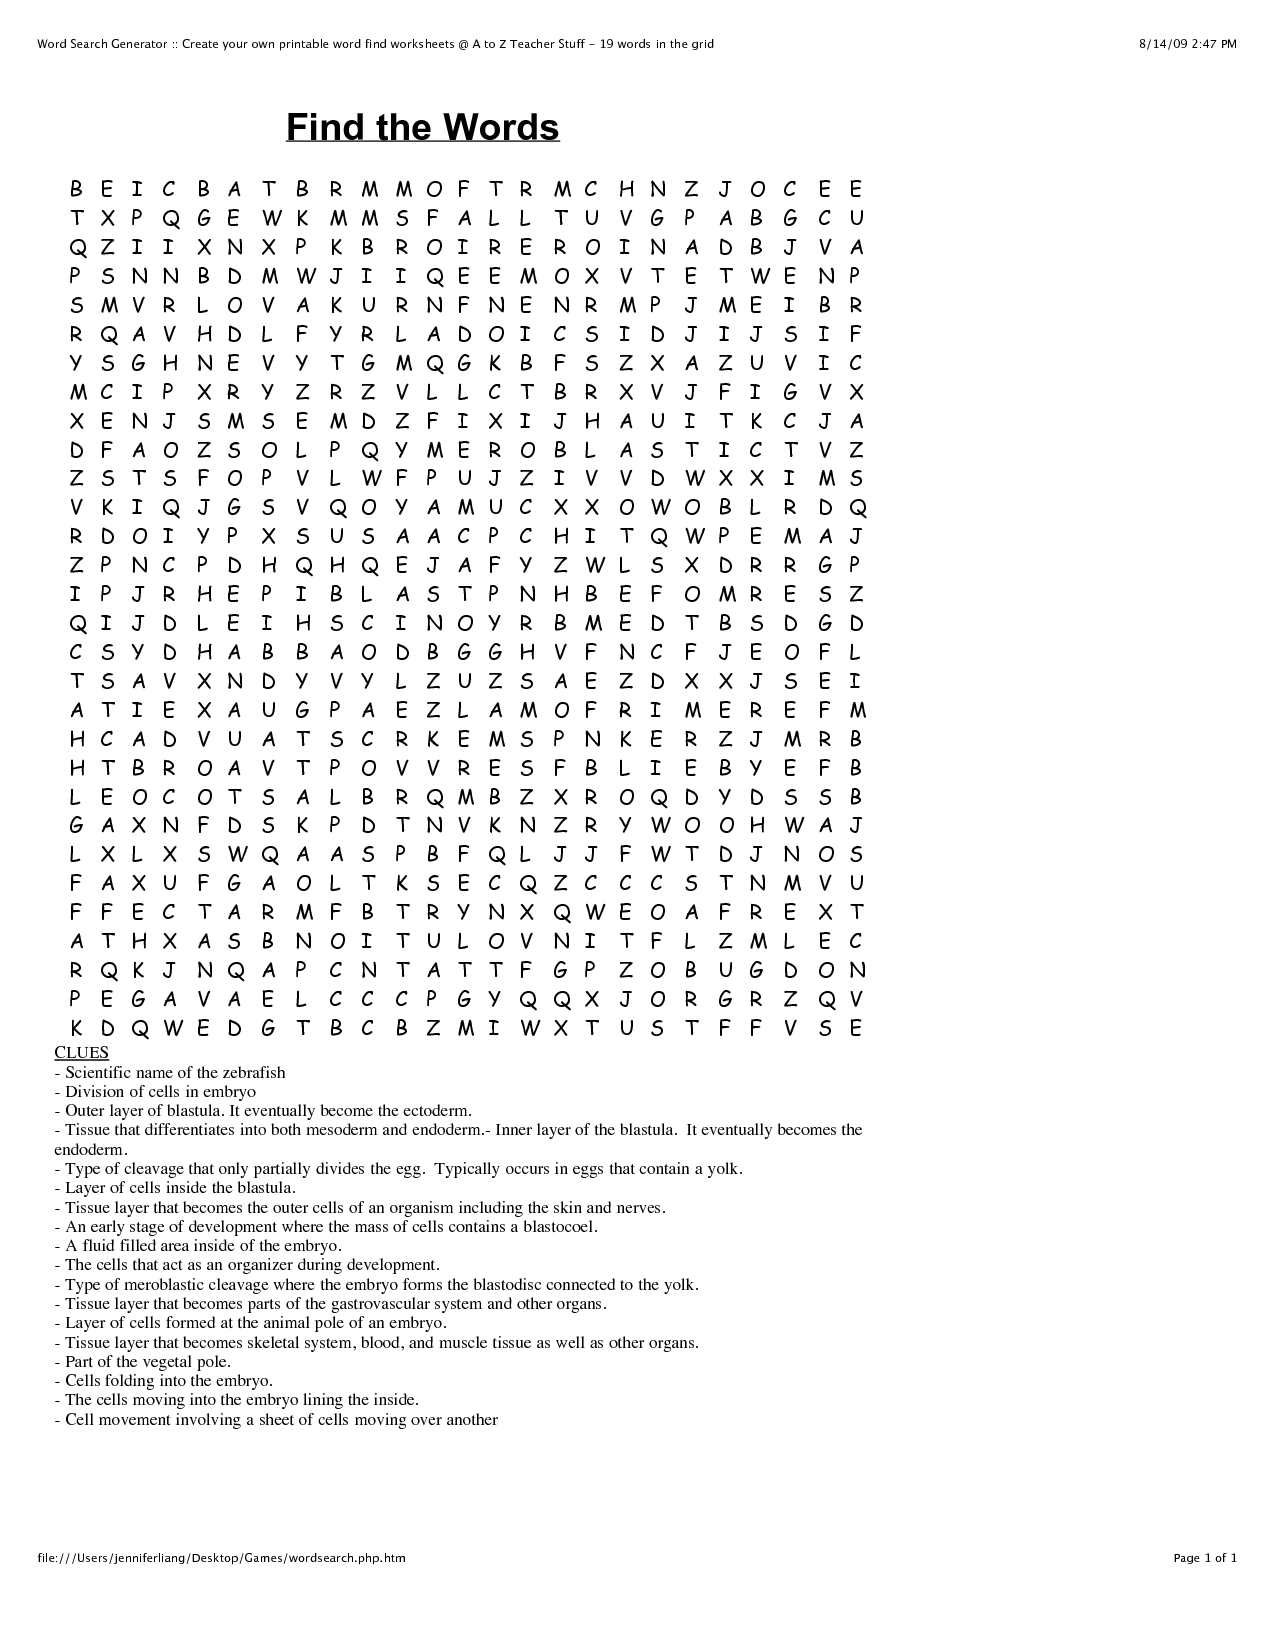 Creat Own Word Search